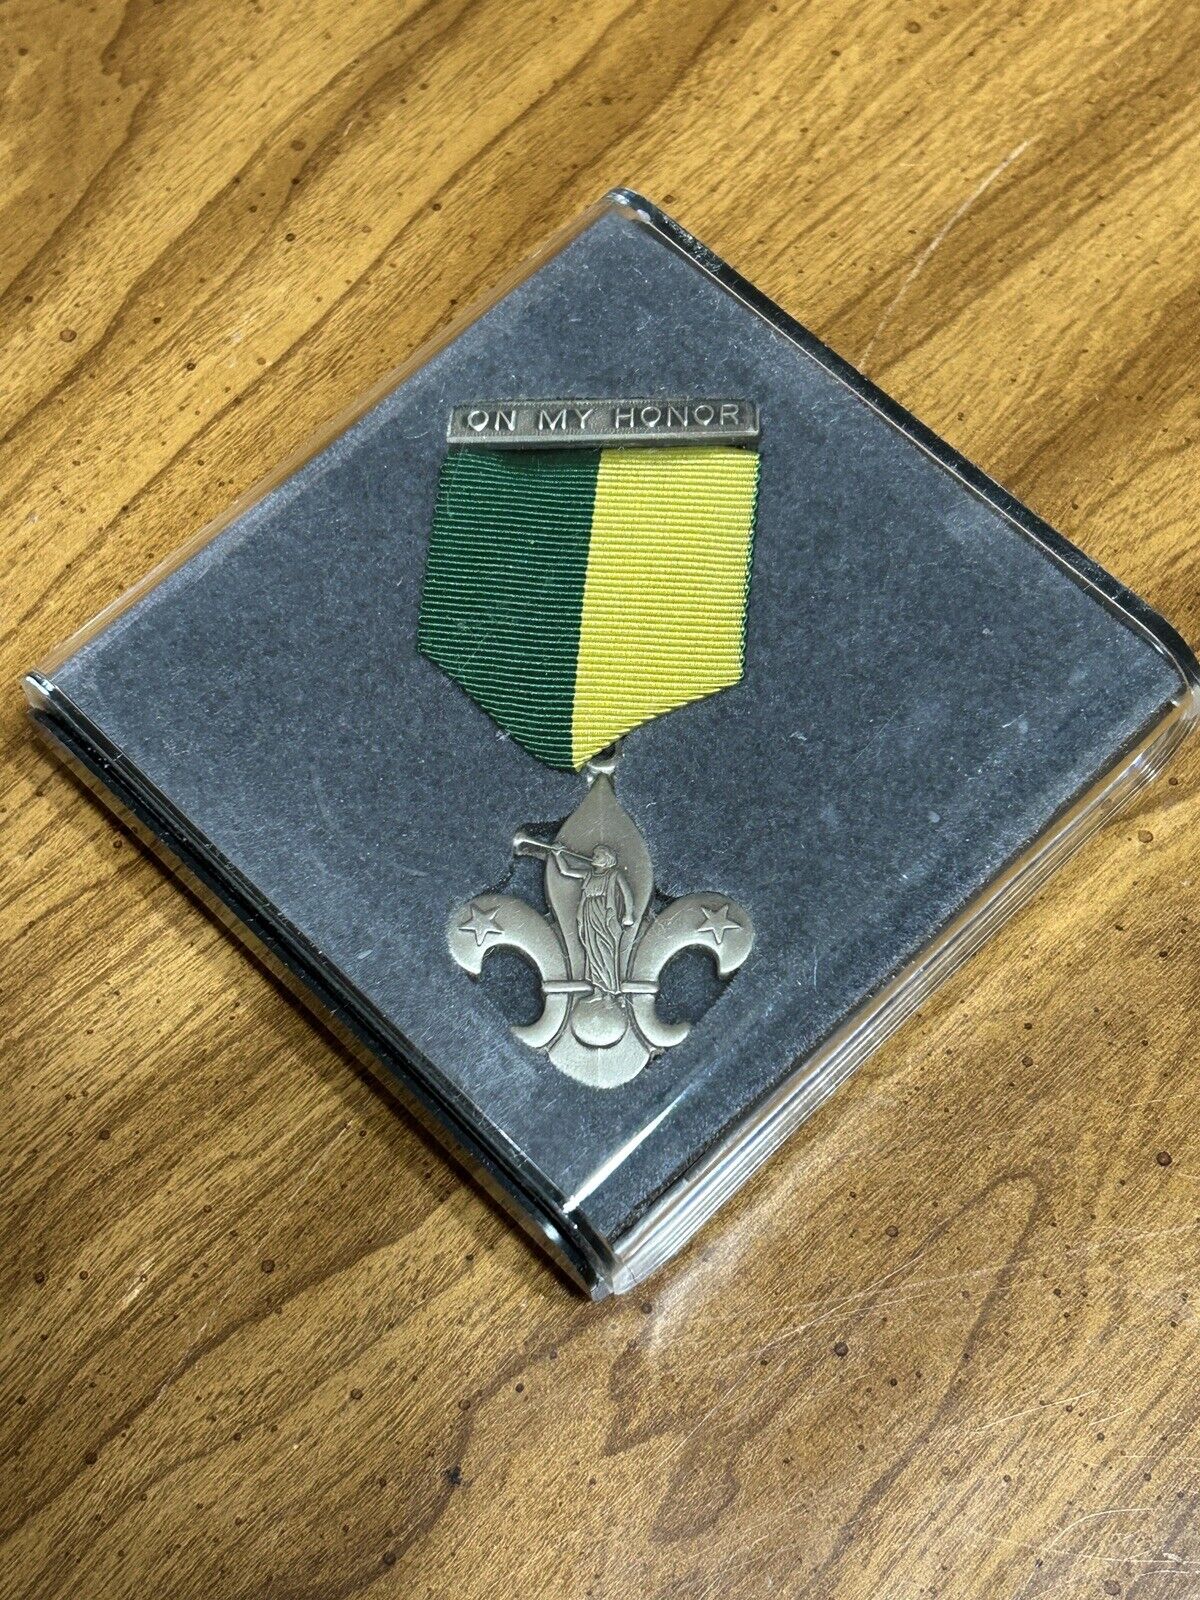 On My Honor Latter Day Saints LDS Mormon Boy Scout Religious Award Medal, New 